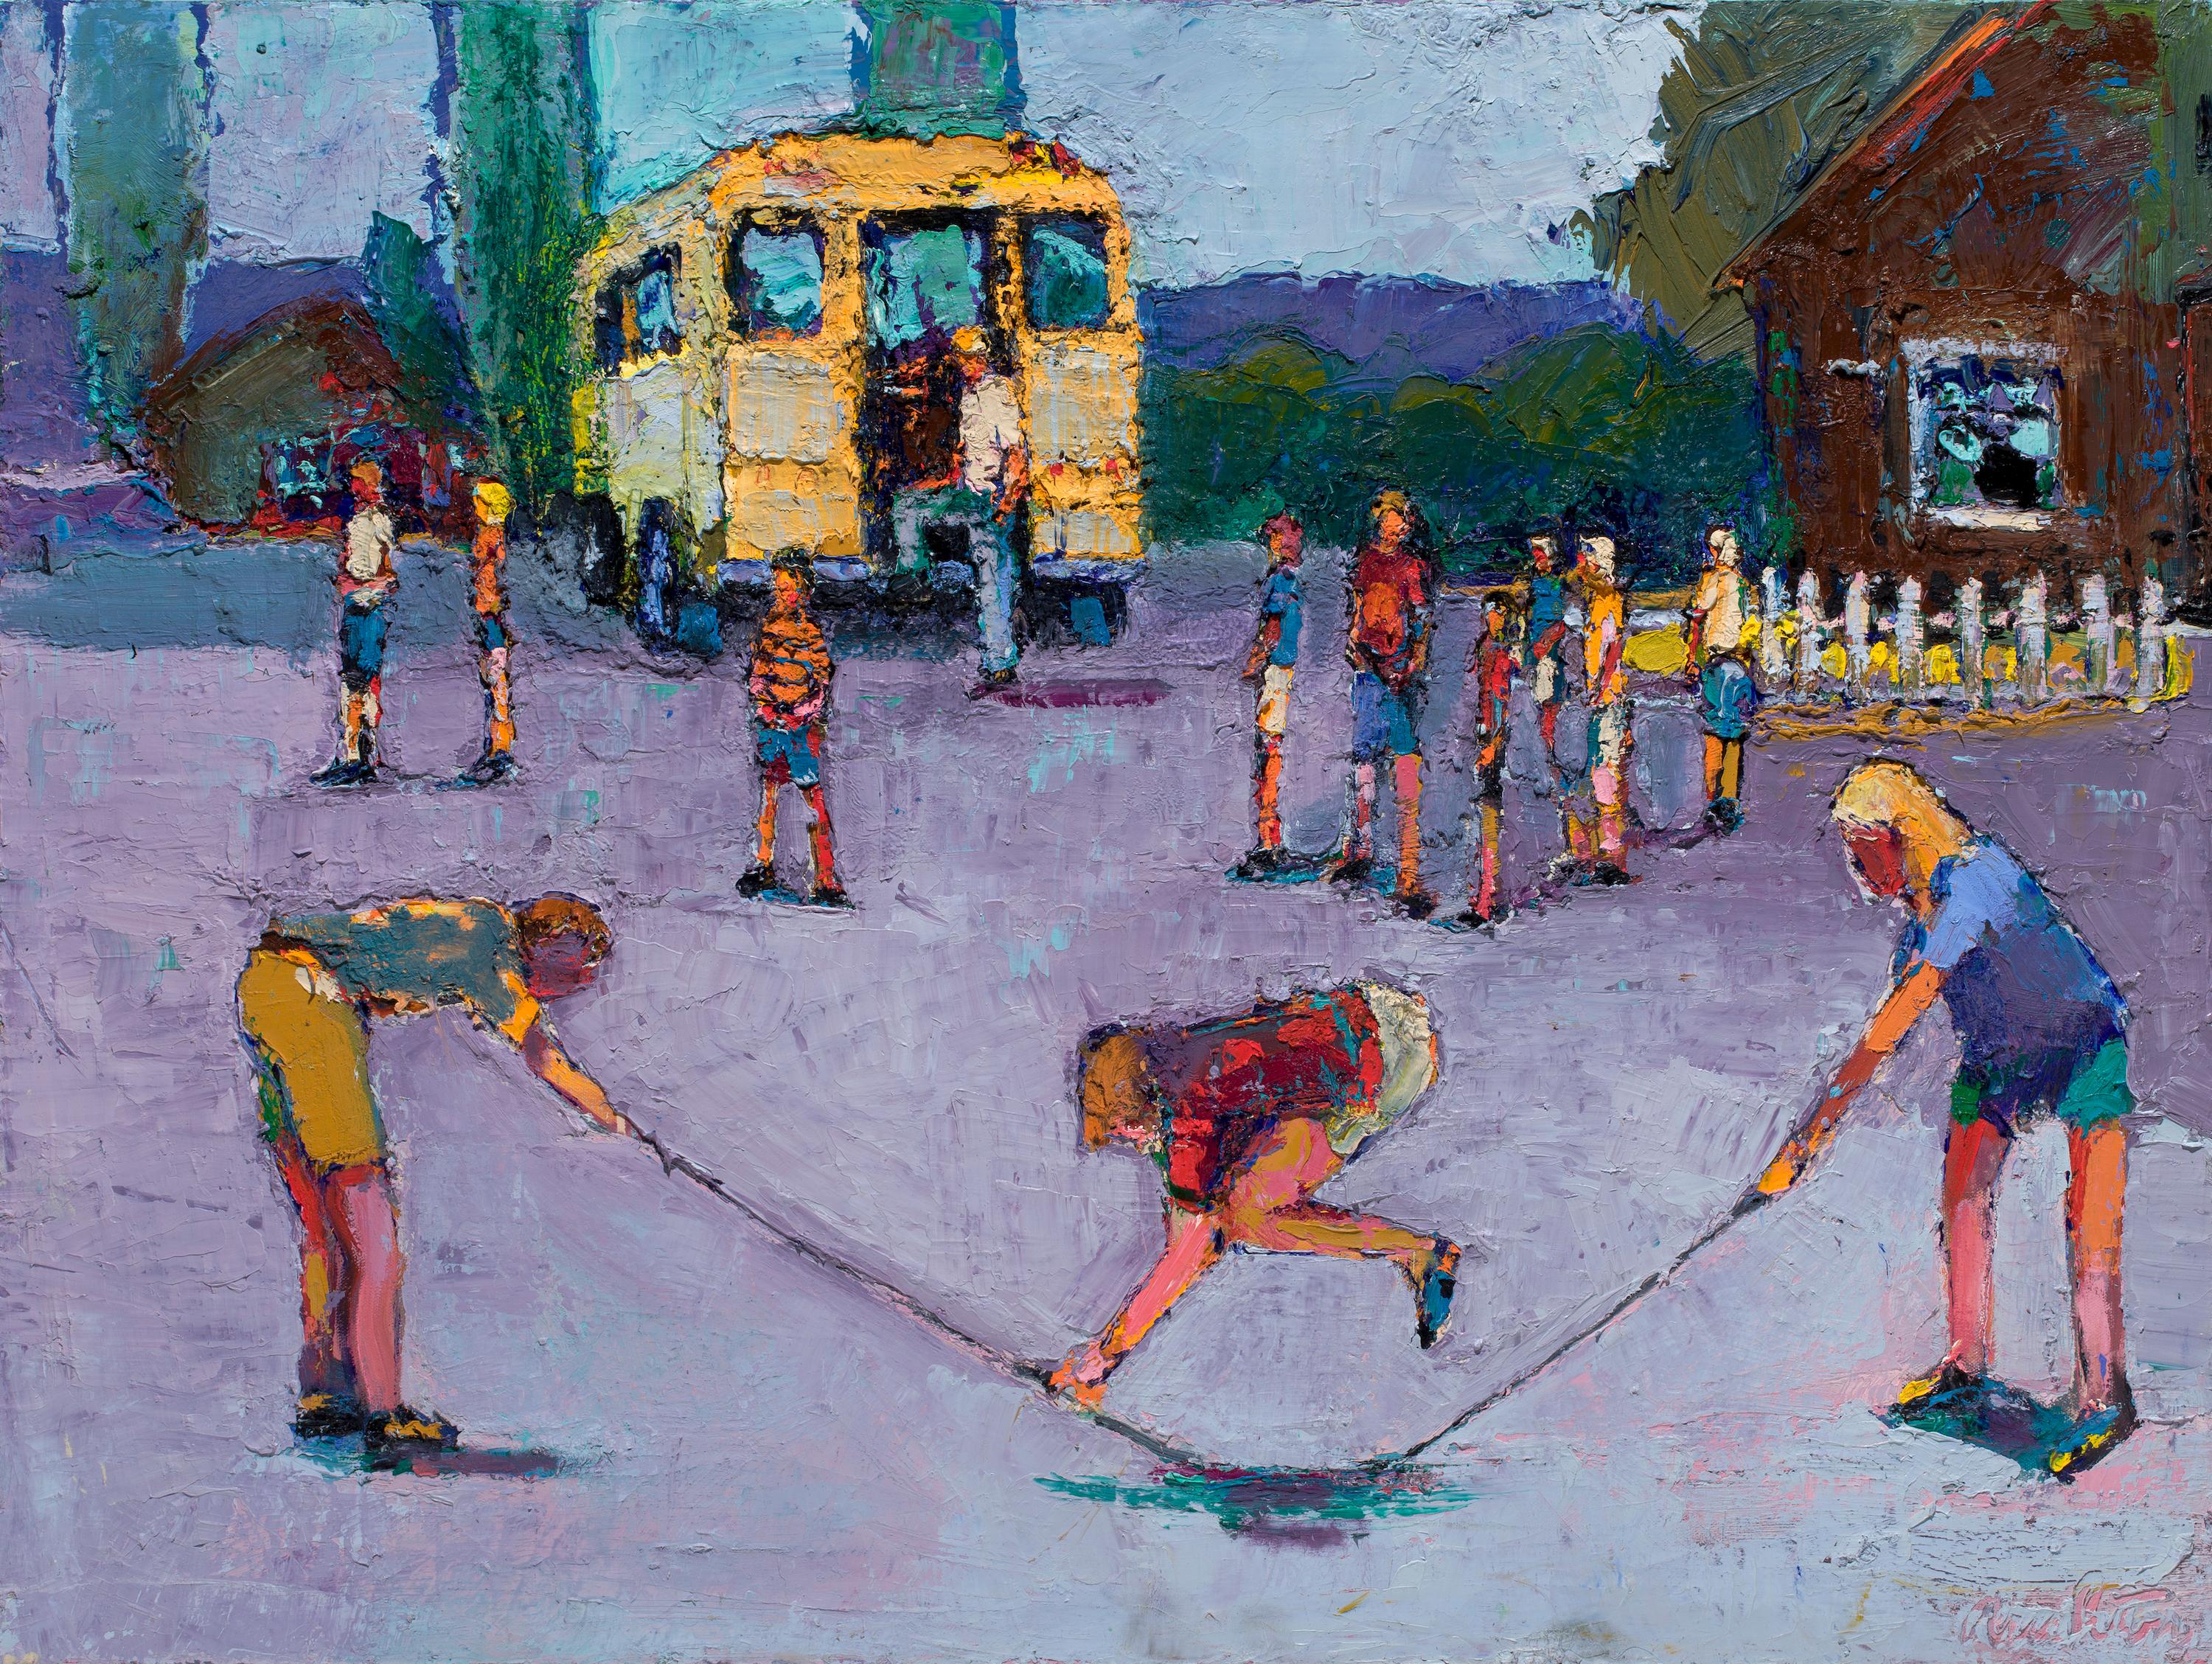 Flat Tire - children play and skip rope - oil on canvas